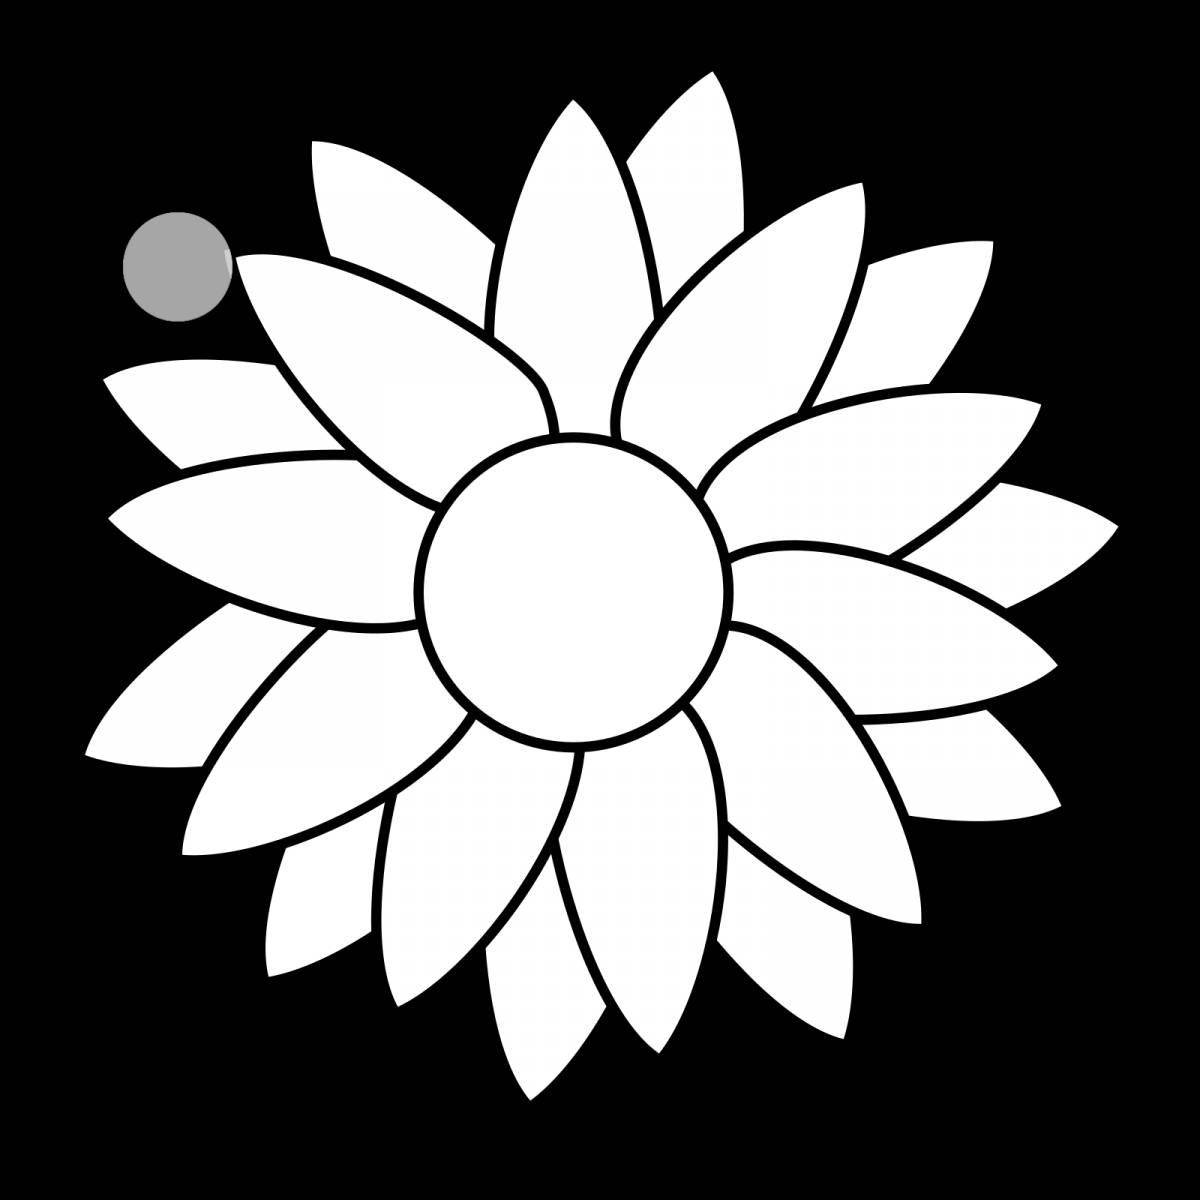 Coloring page serene flower pattern